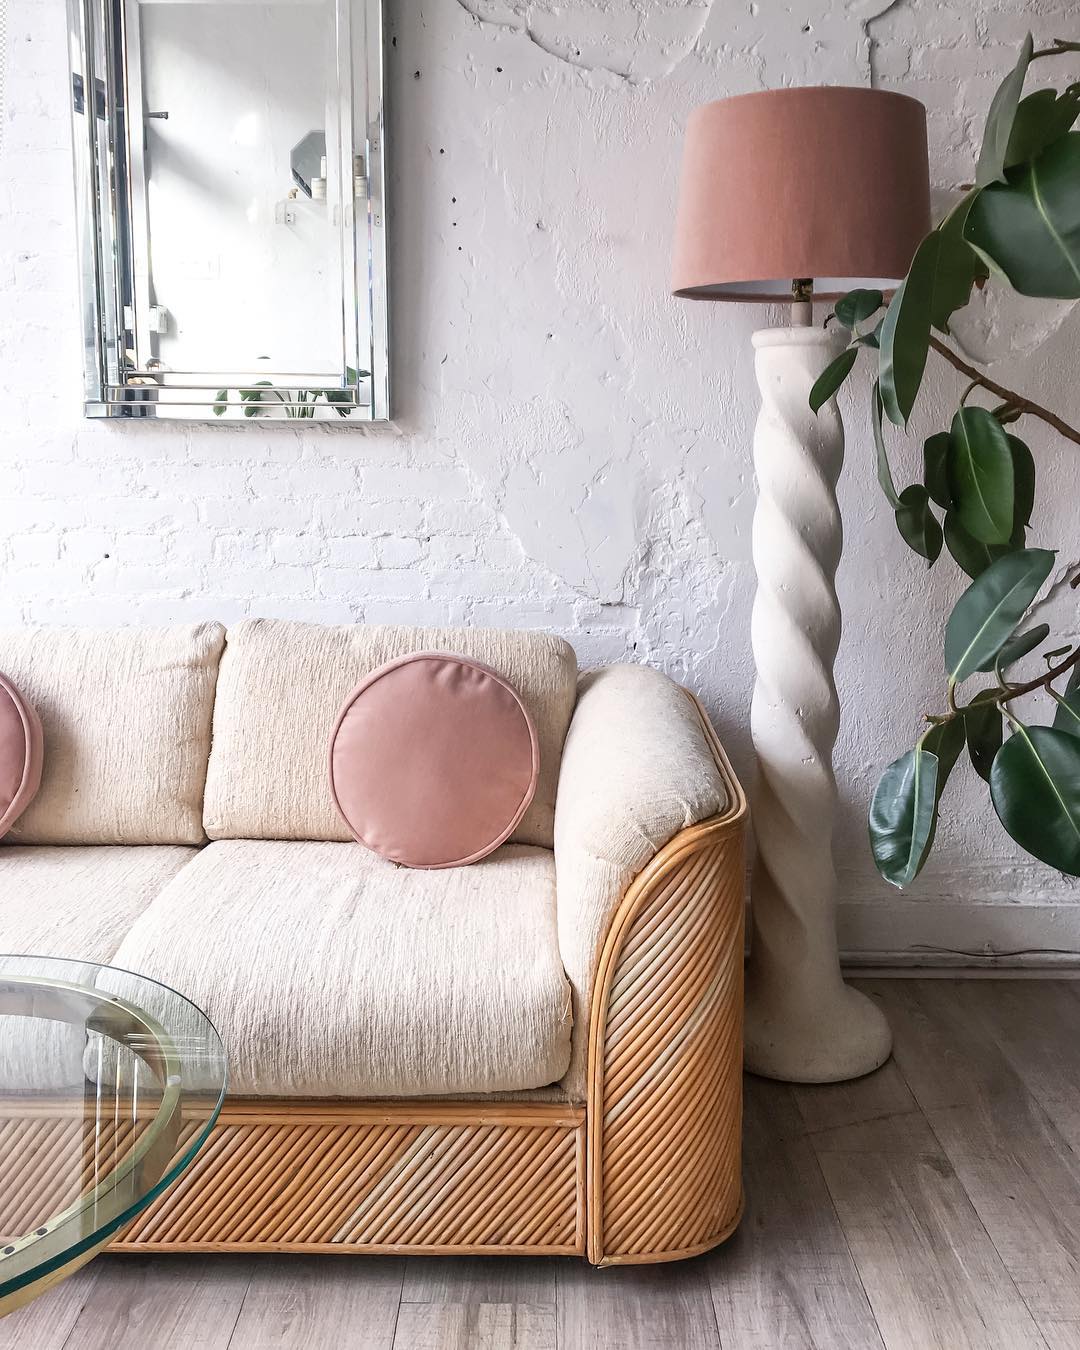 Love Vintage Home Decor? Follow These Instagram Accounts